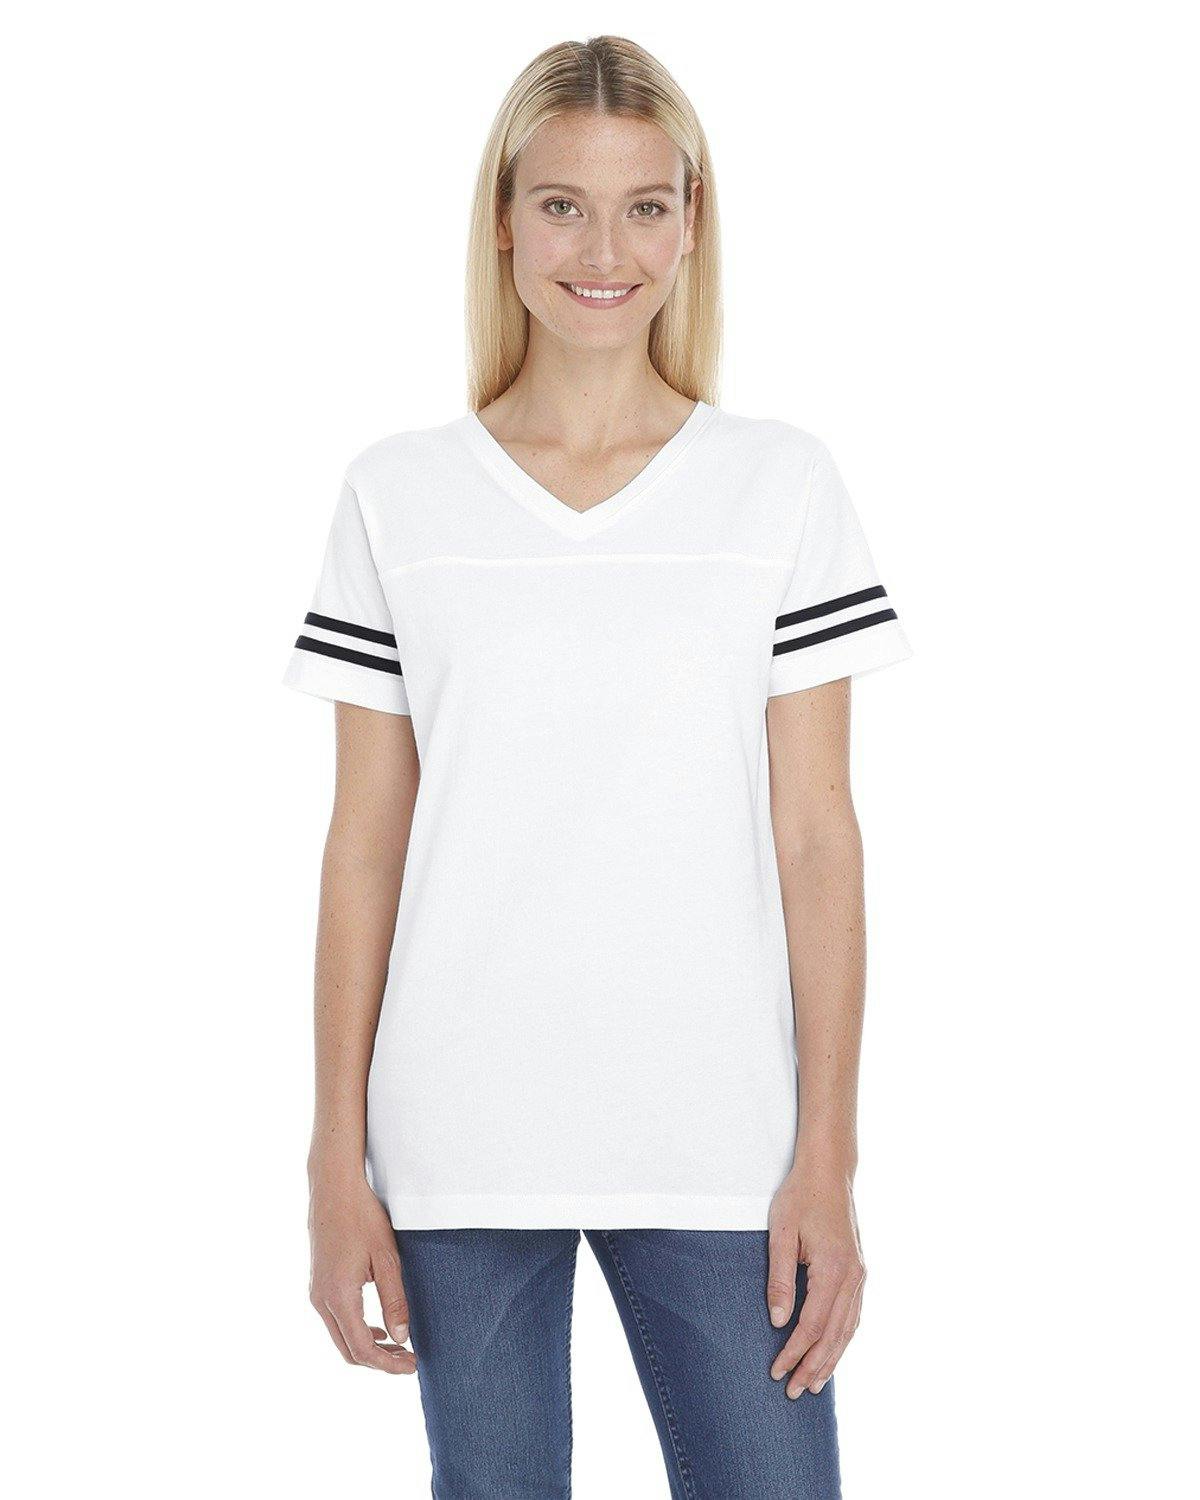 Image for Ladies' Football T-Shirt